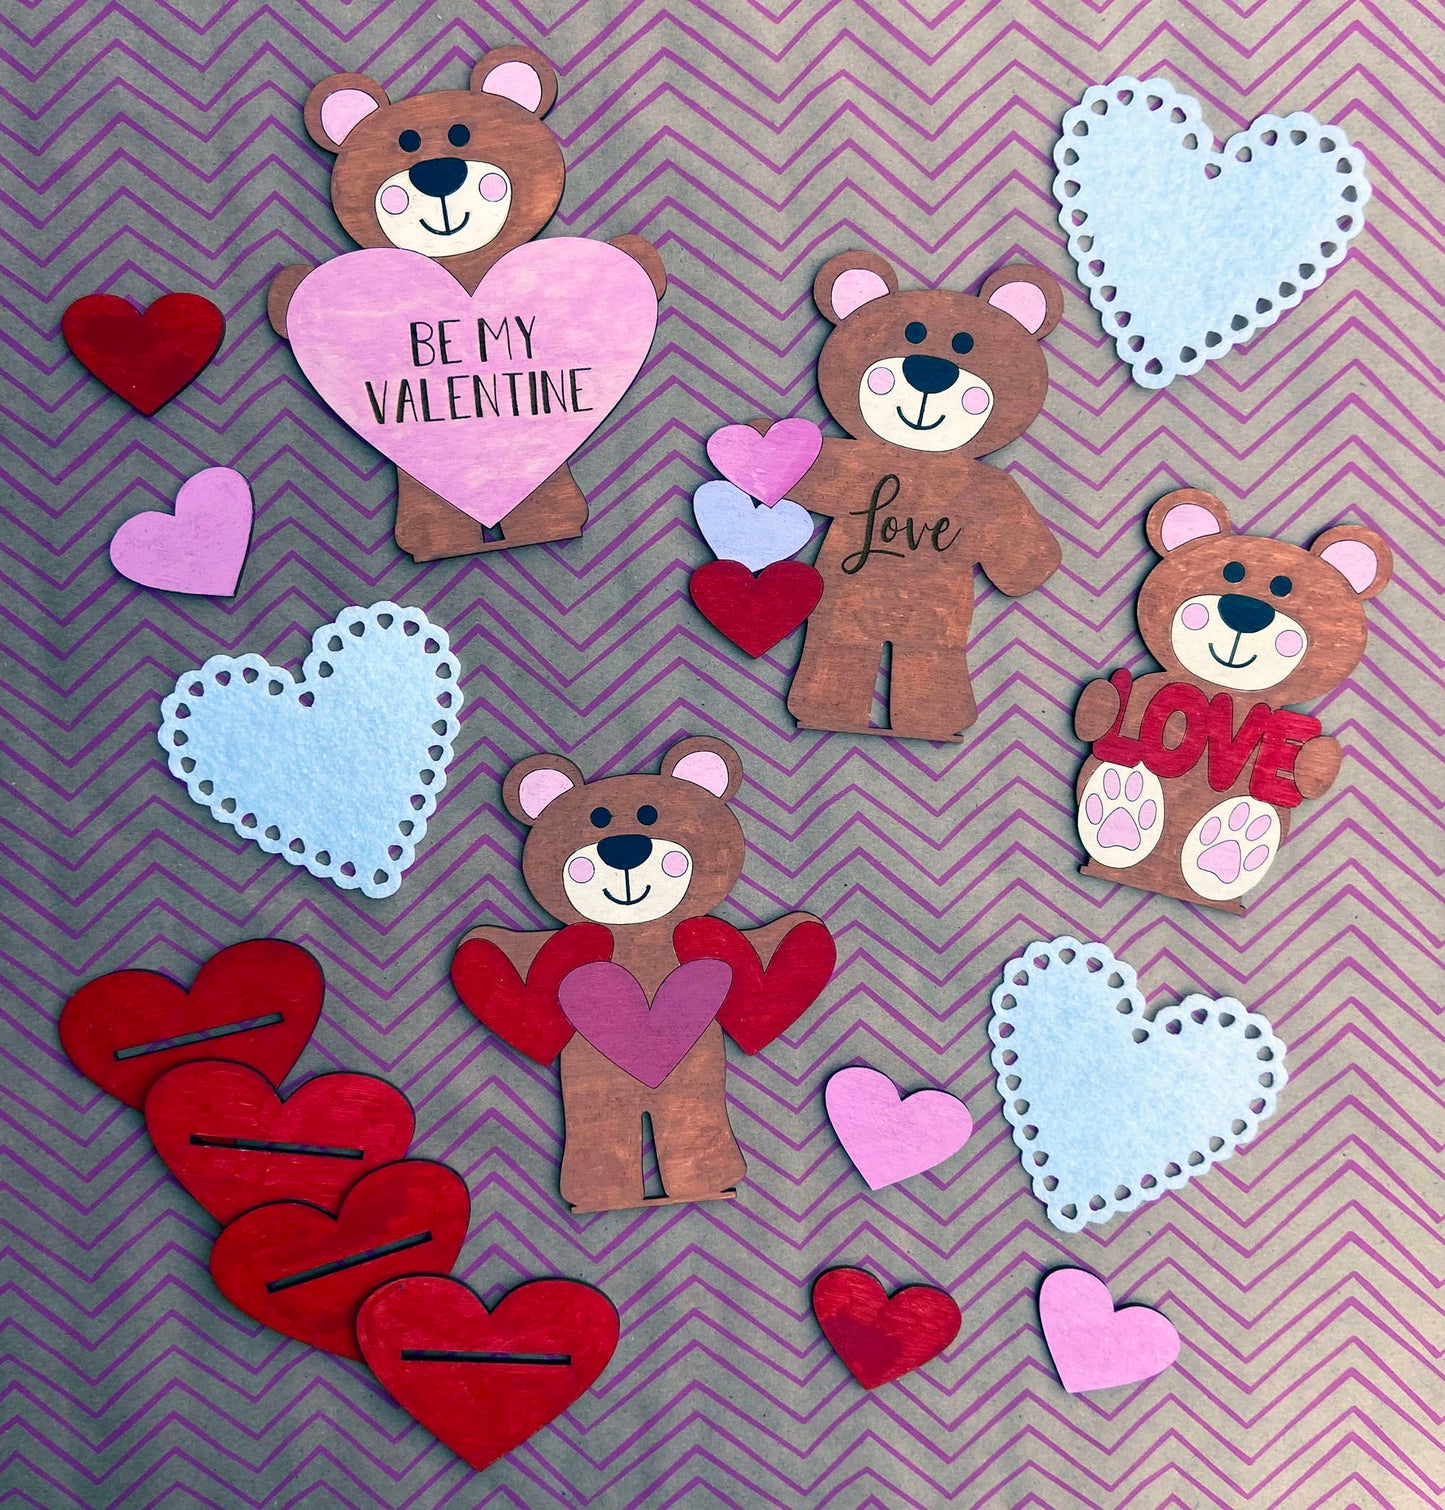 Valentine’s Day Teddy Bears - Ready to Paint